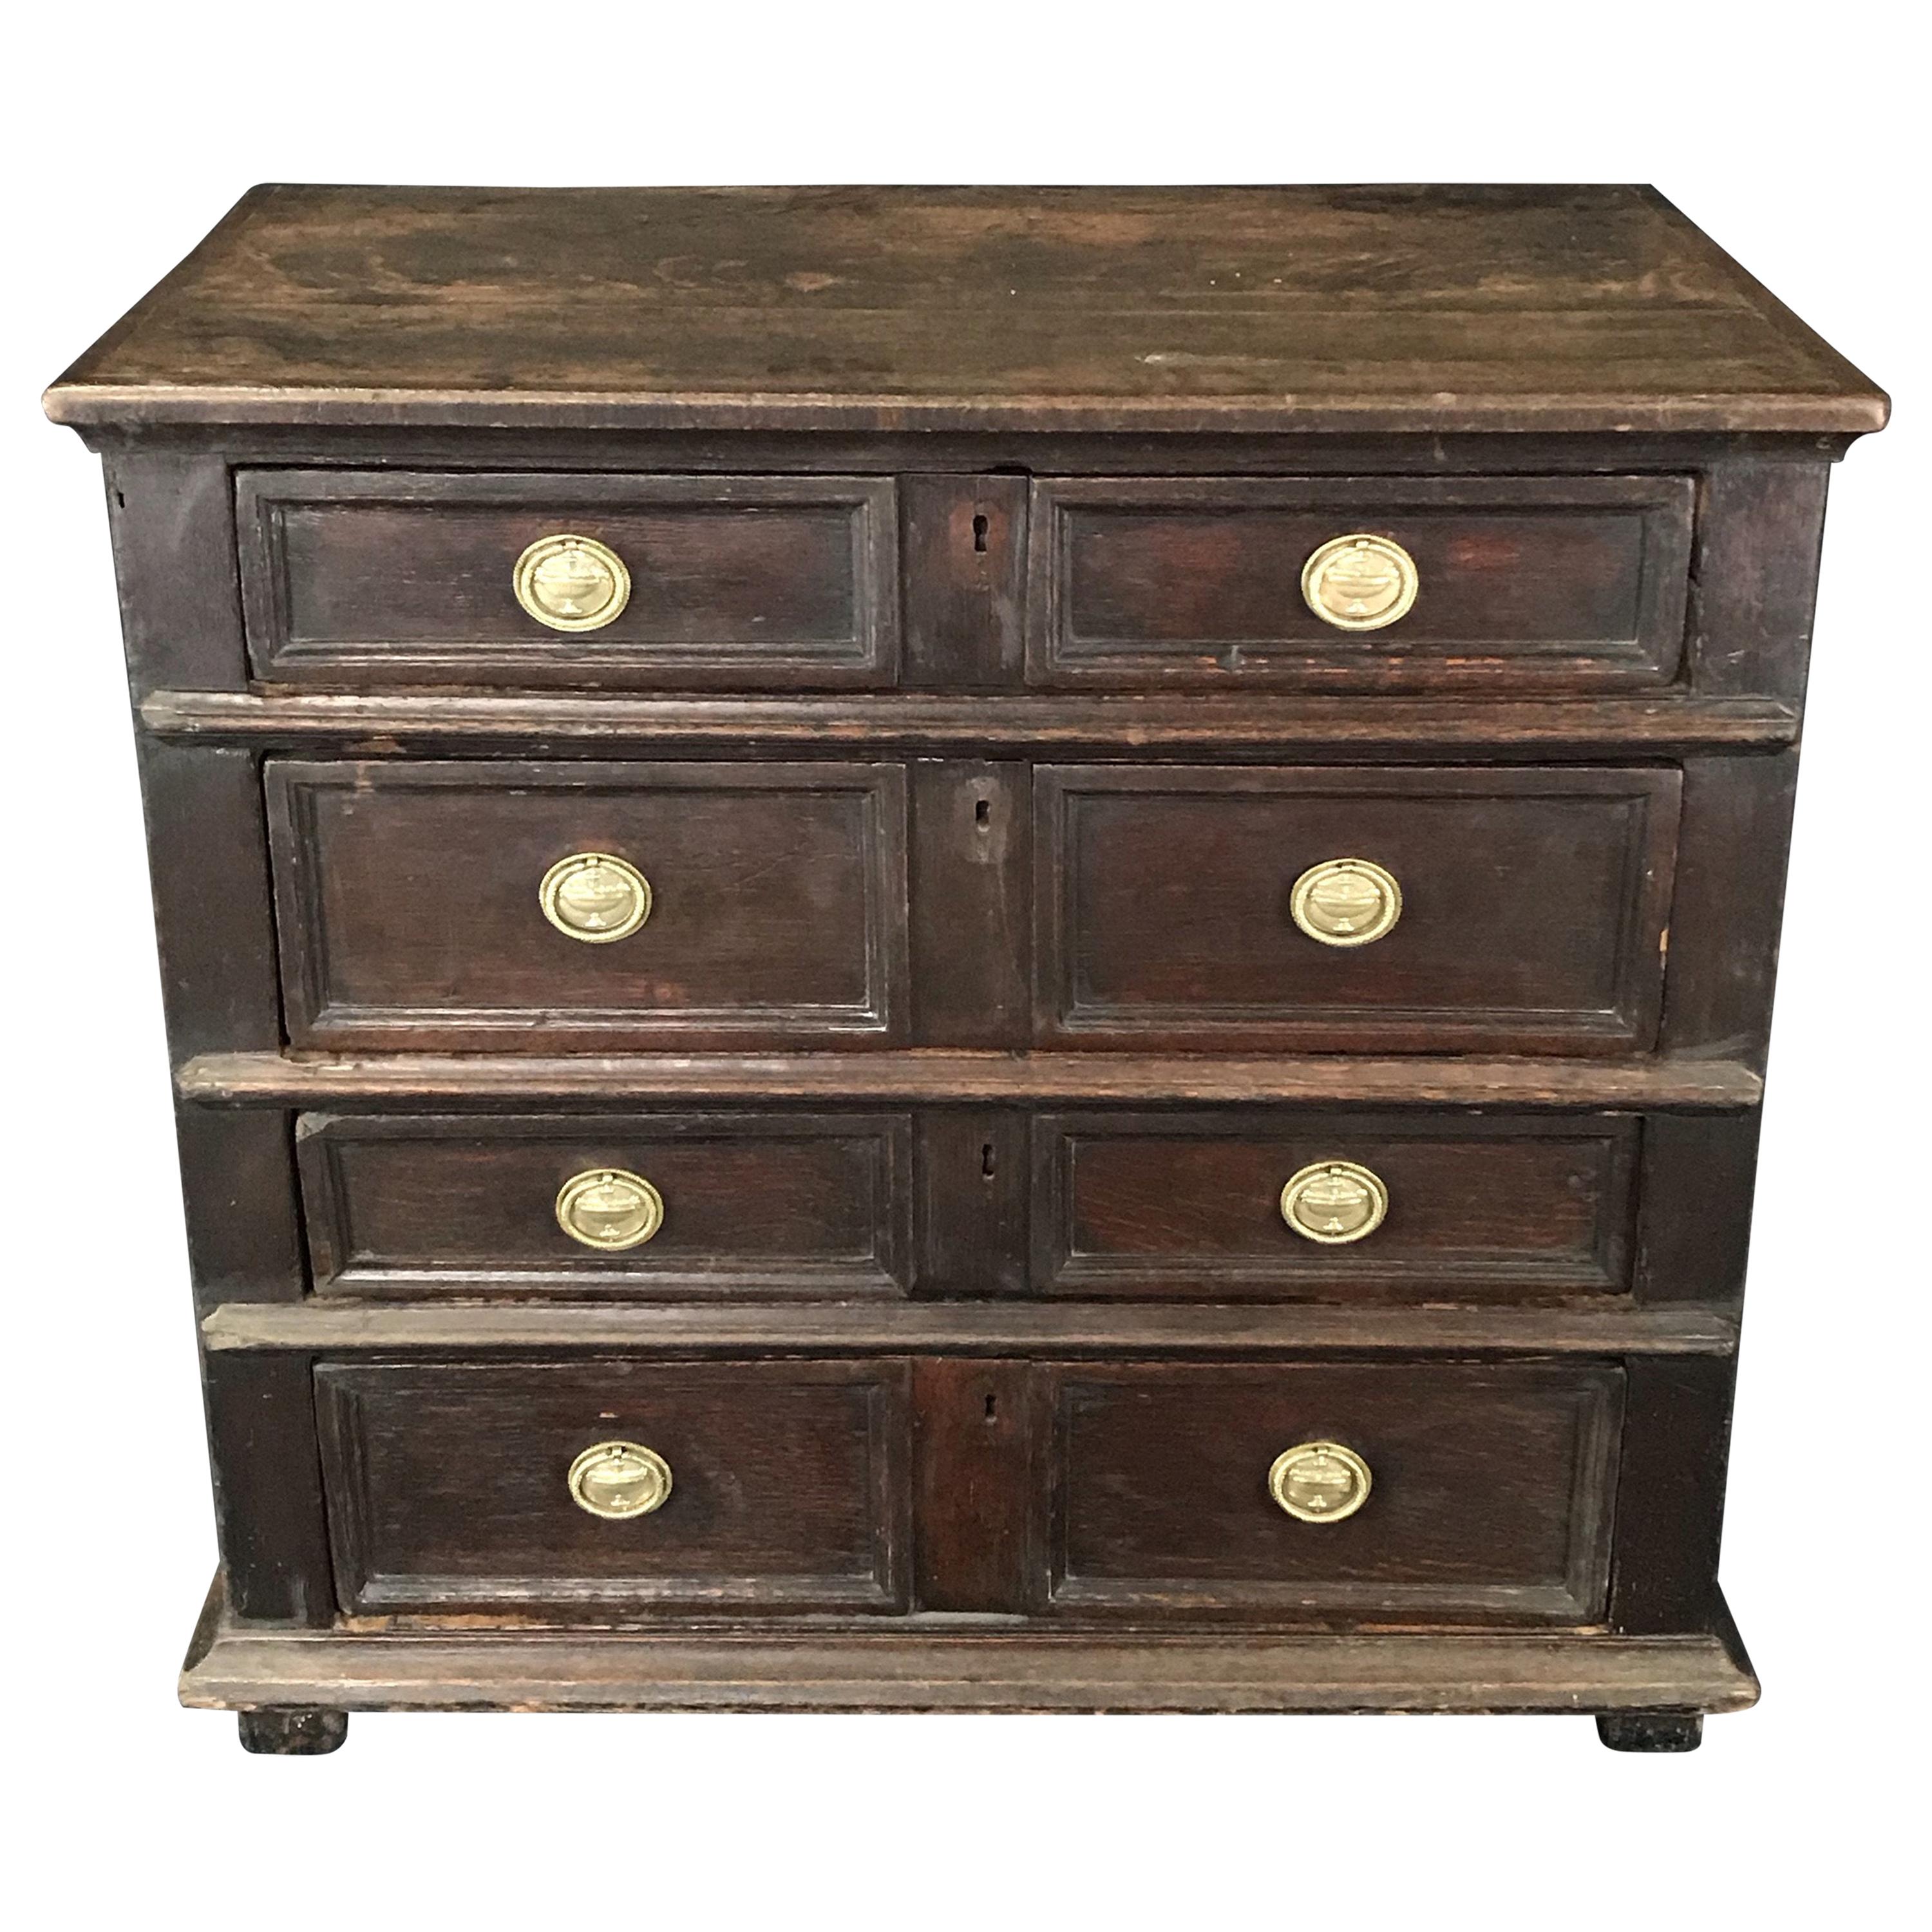 Character Rich Mid-17th Century Charles II Period Oak Chest of Drawers For Sale